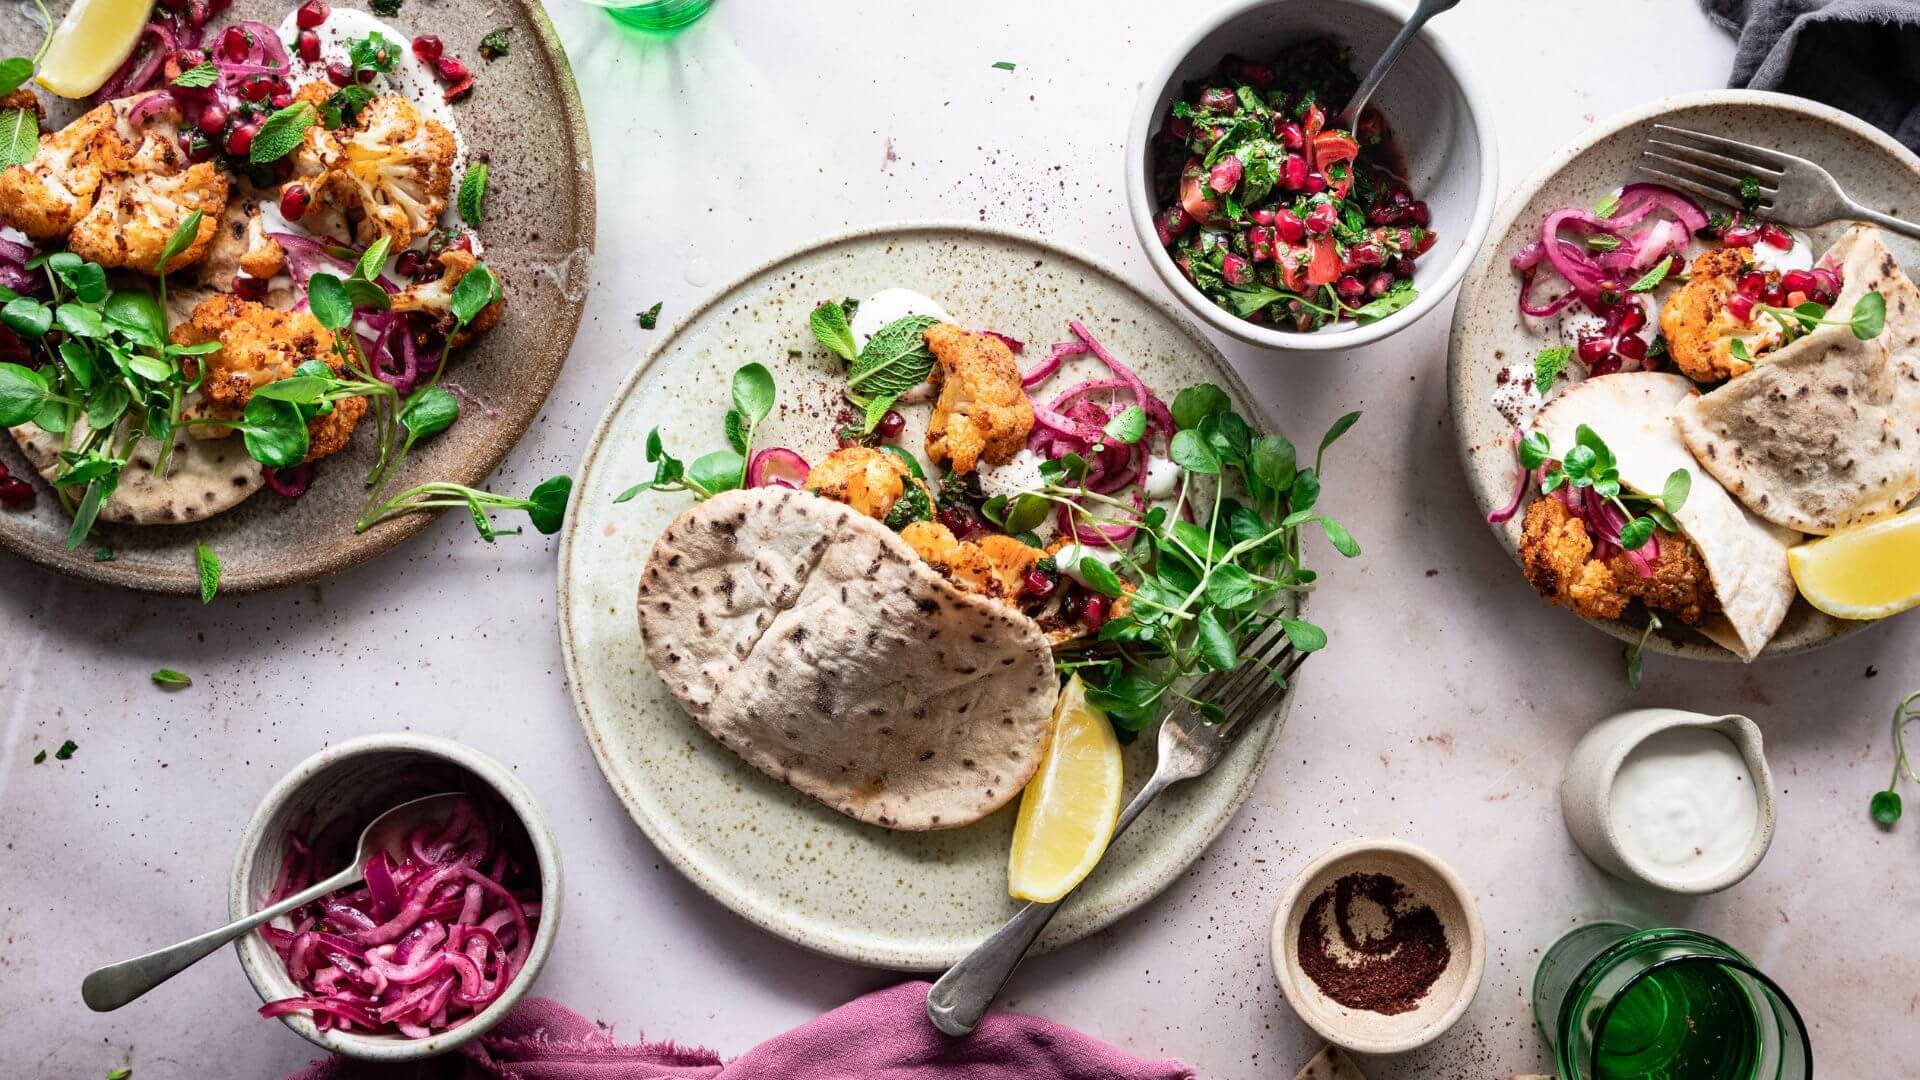 Gluten-free living: a colourful table spread with pita breads filled with spiced cauliflower, with salad, lemon wedges and pomegranate herb salad on the side.